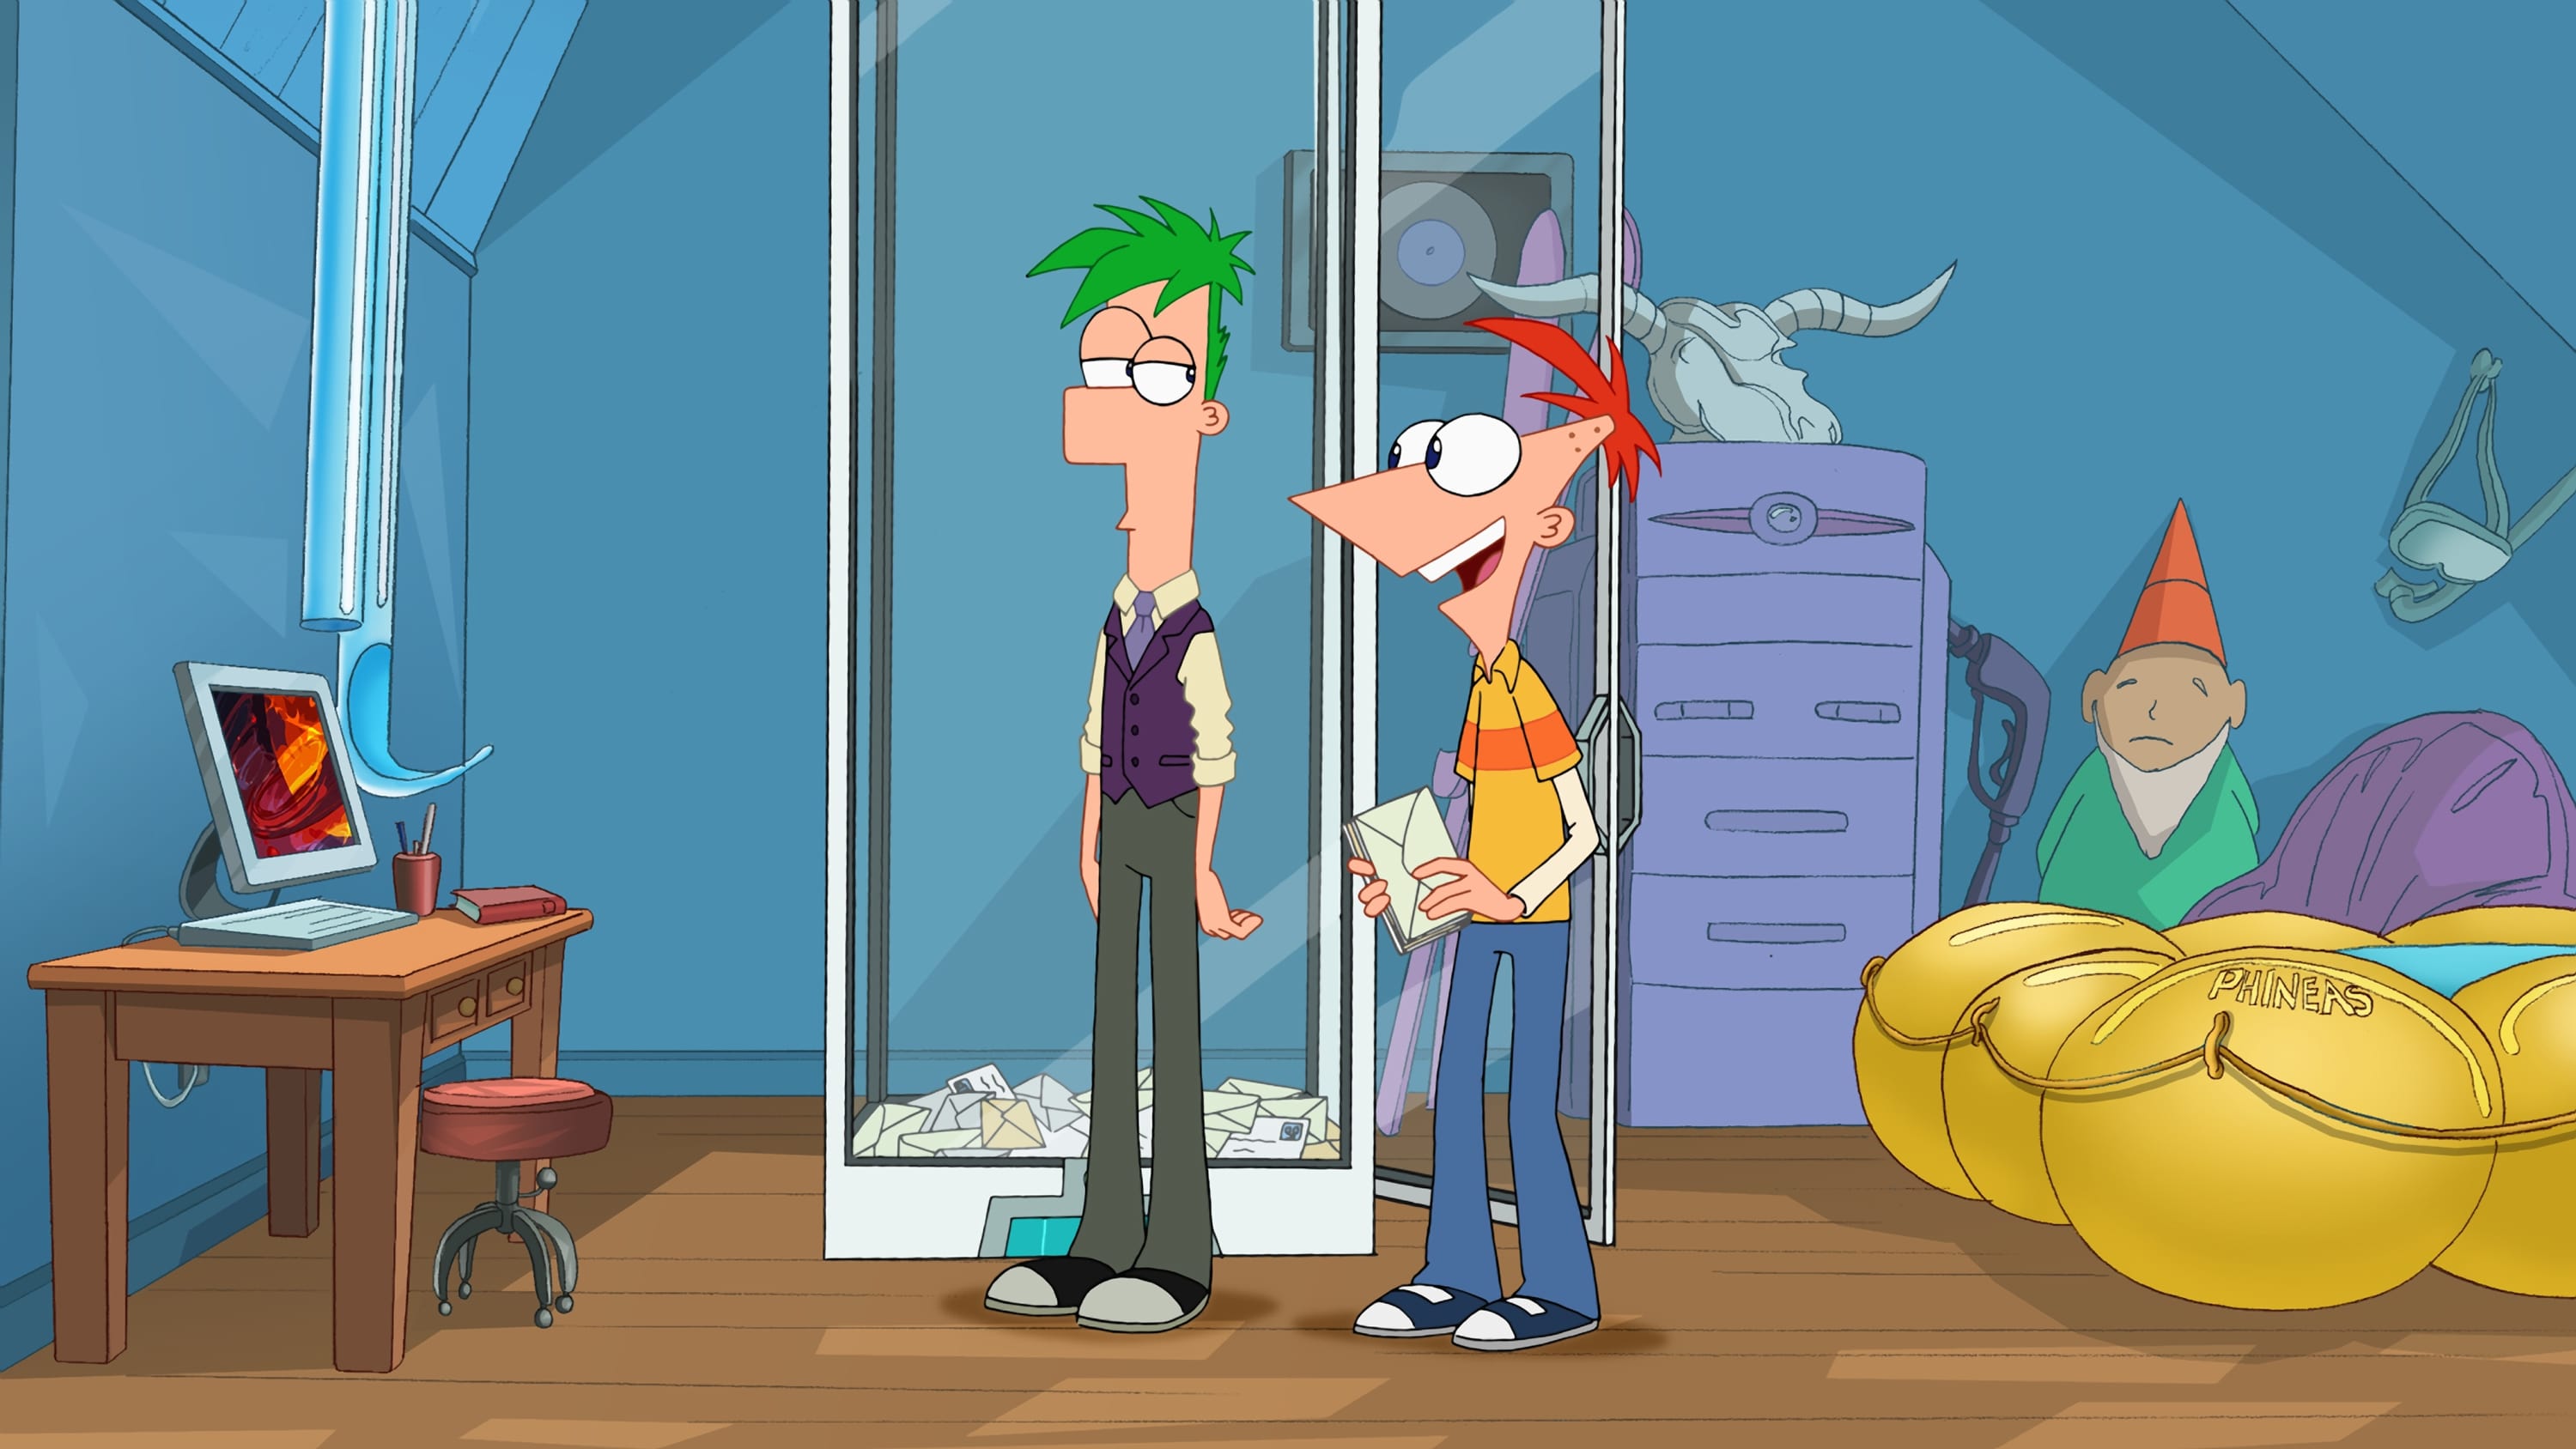 Phineas and Ferb " Act Your Age.